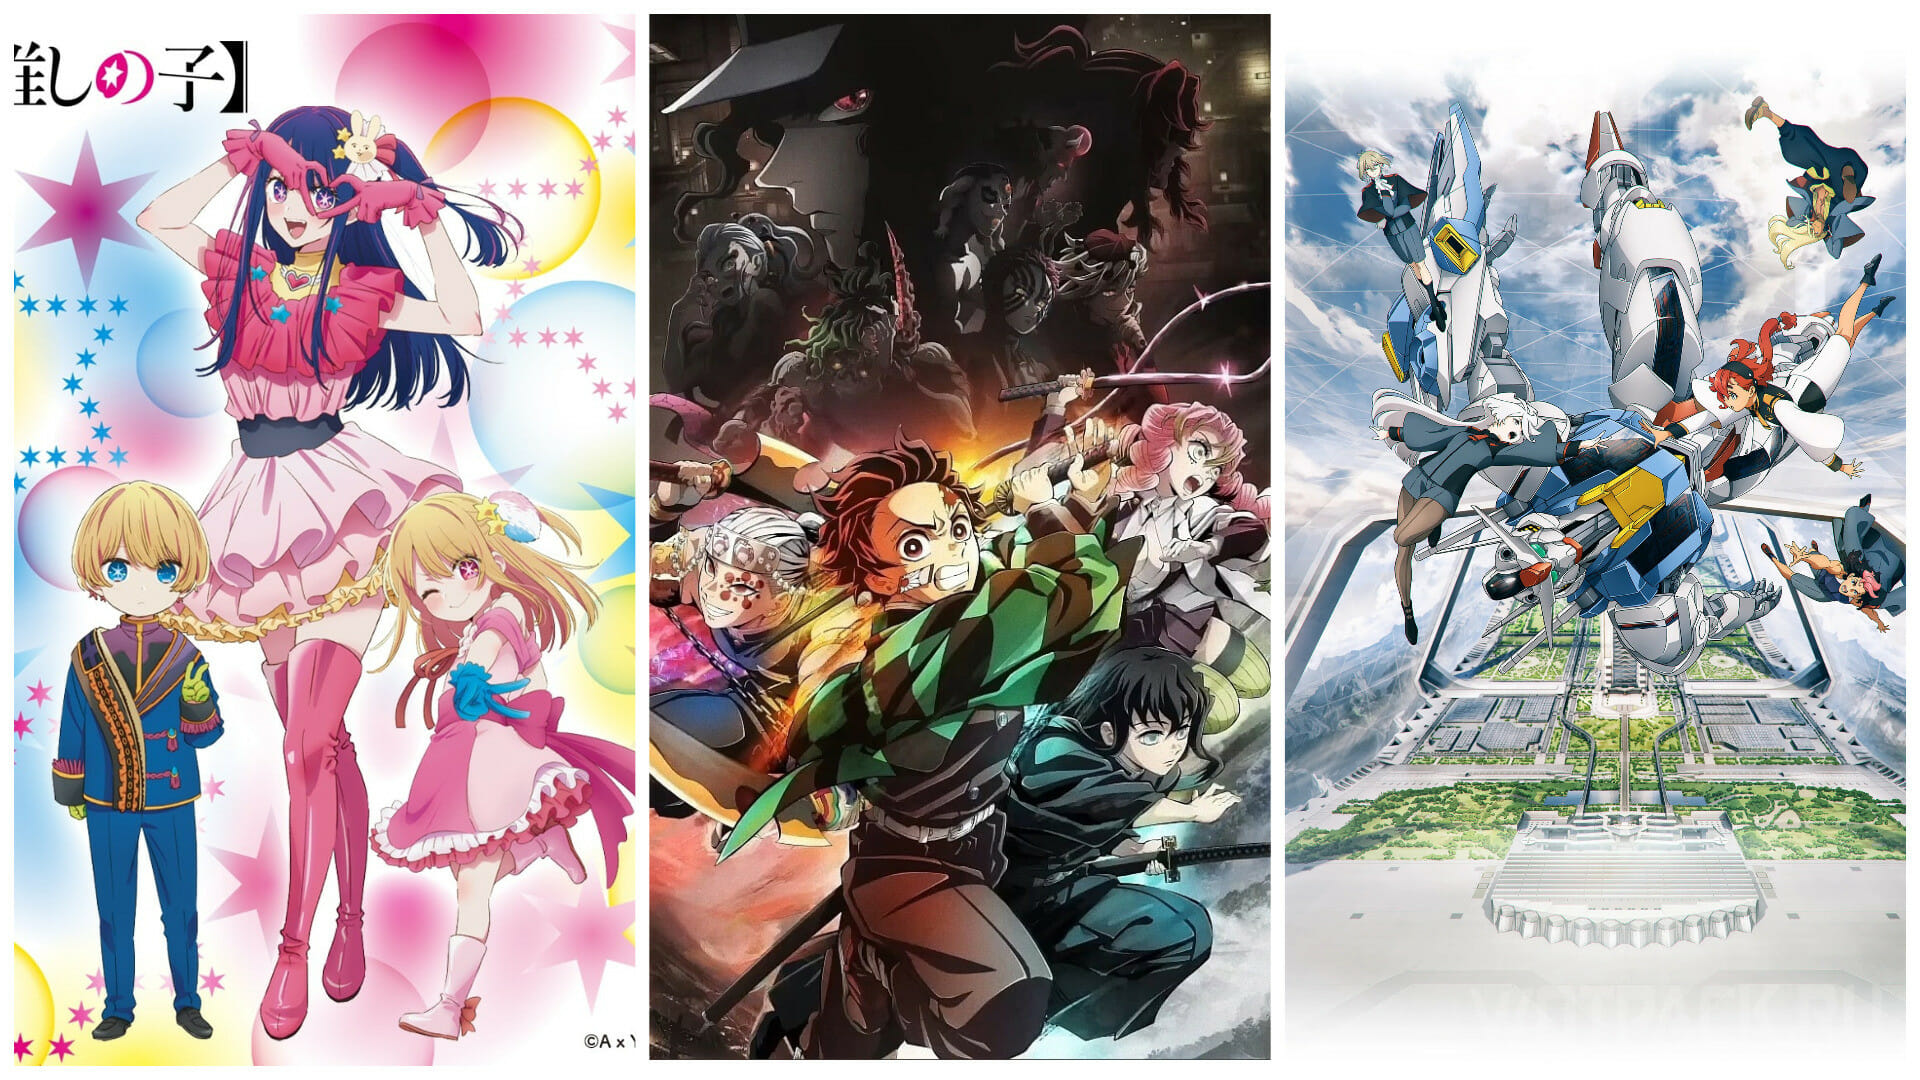 10 Most-Favorited Anime By Users (According To MyAnimeList)